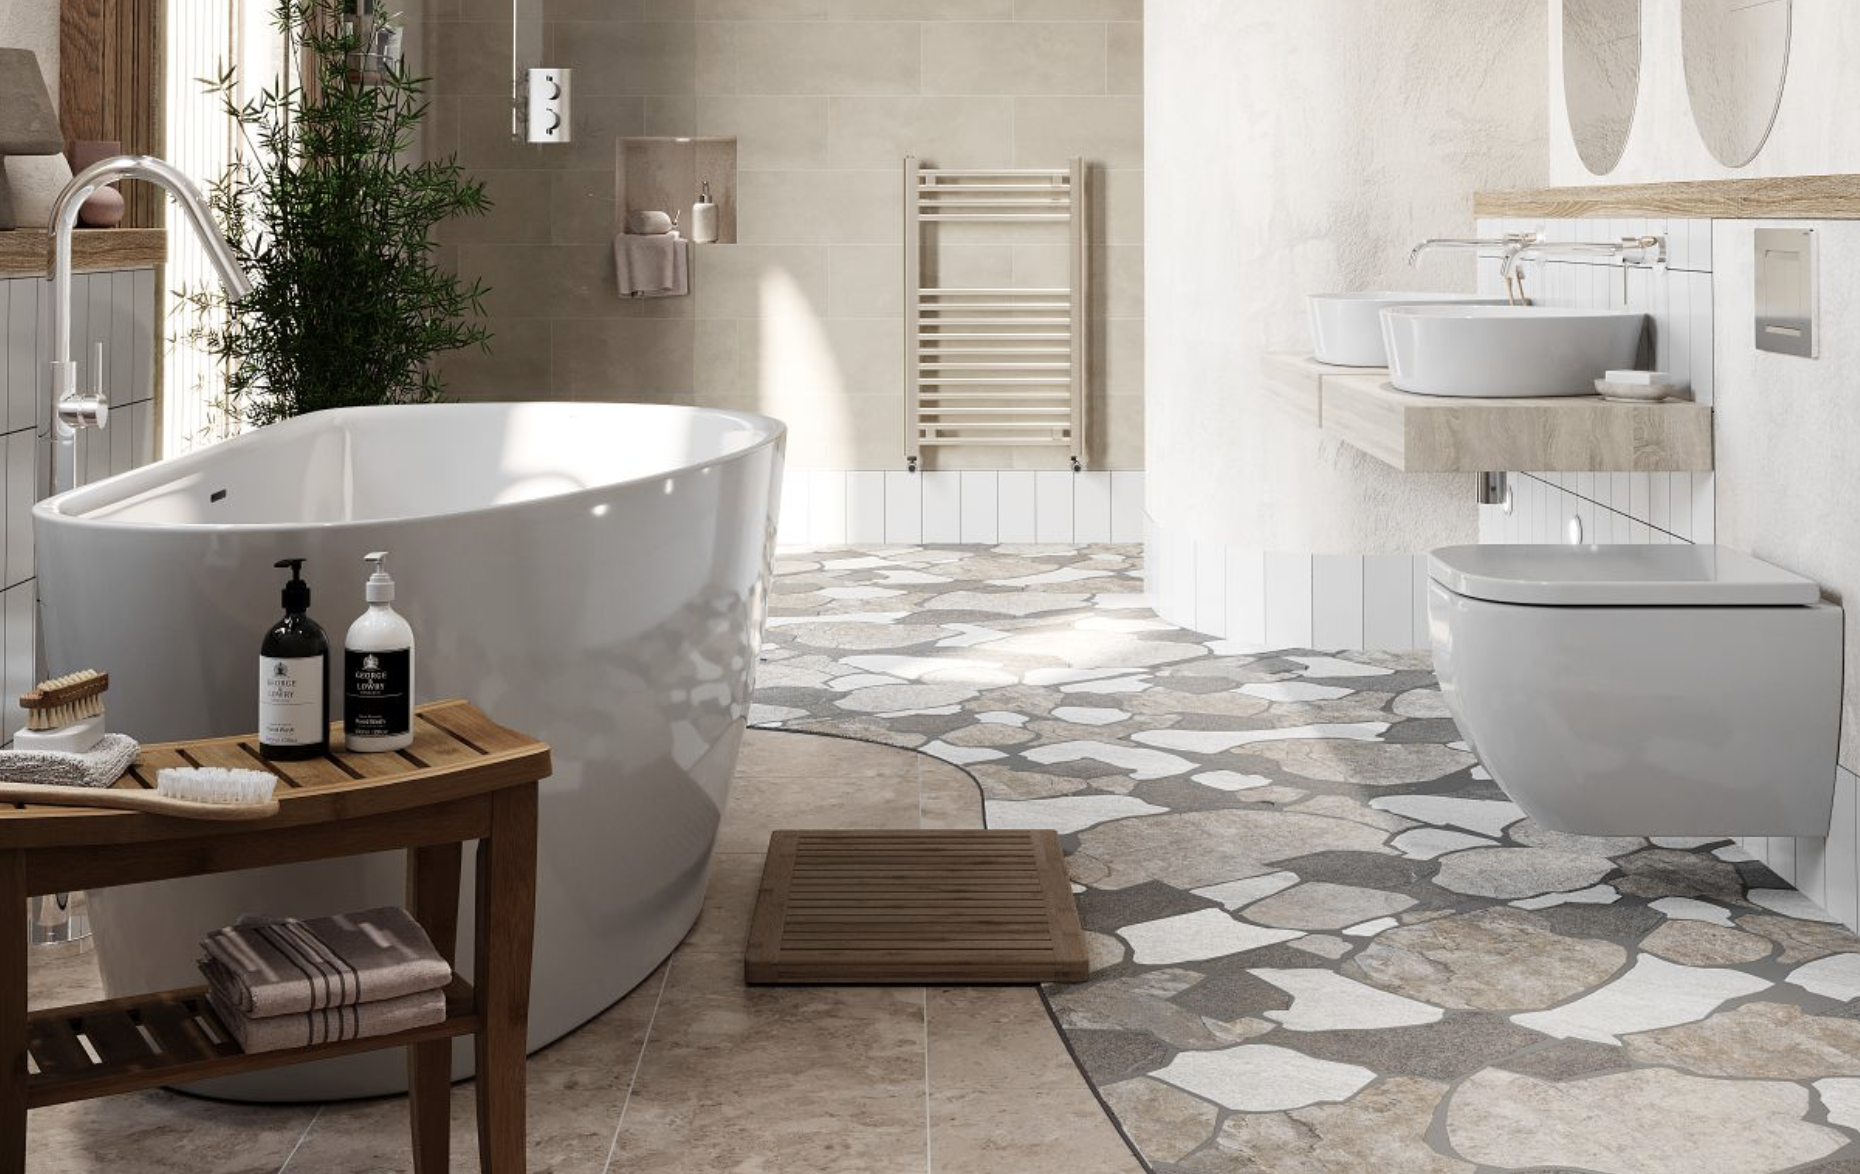 Bathroom retailer launches UK first bespoke design and installation service